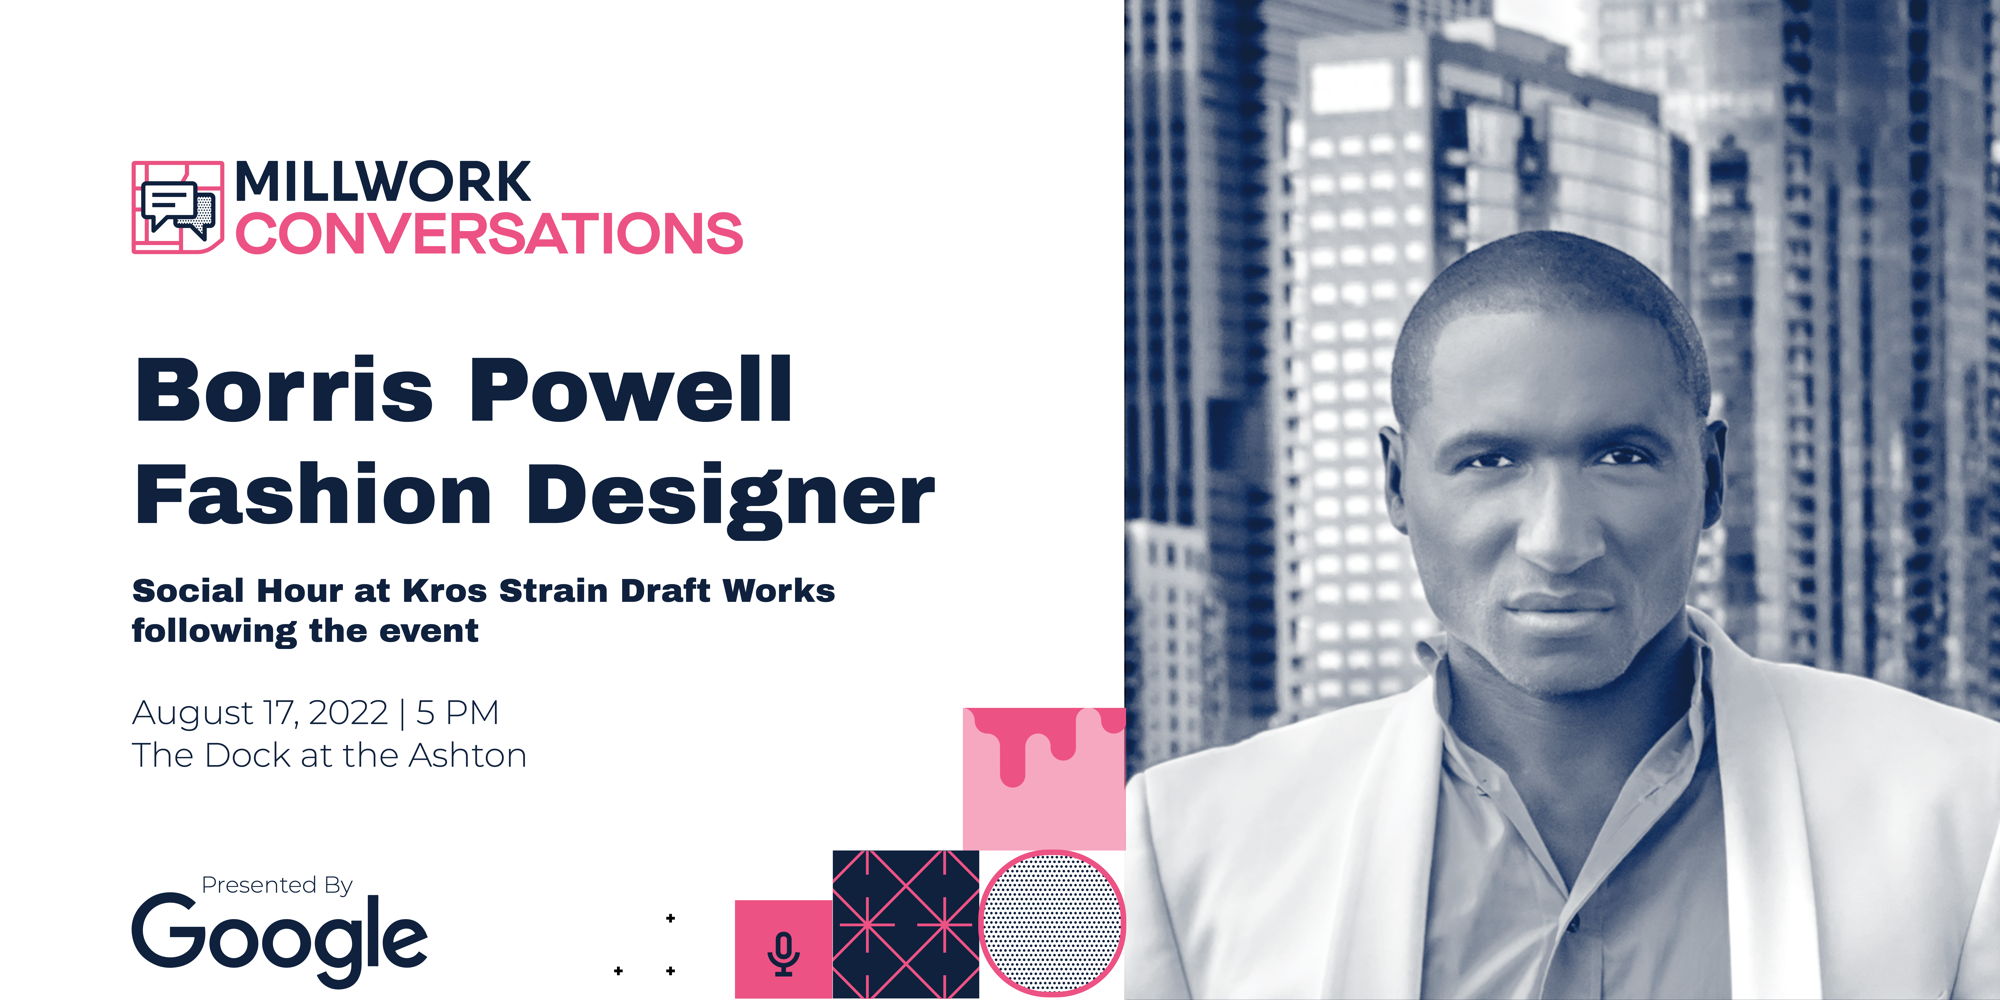 Millwork Conversations Presented By Google | Borris Powell promotional image